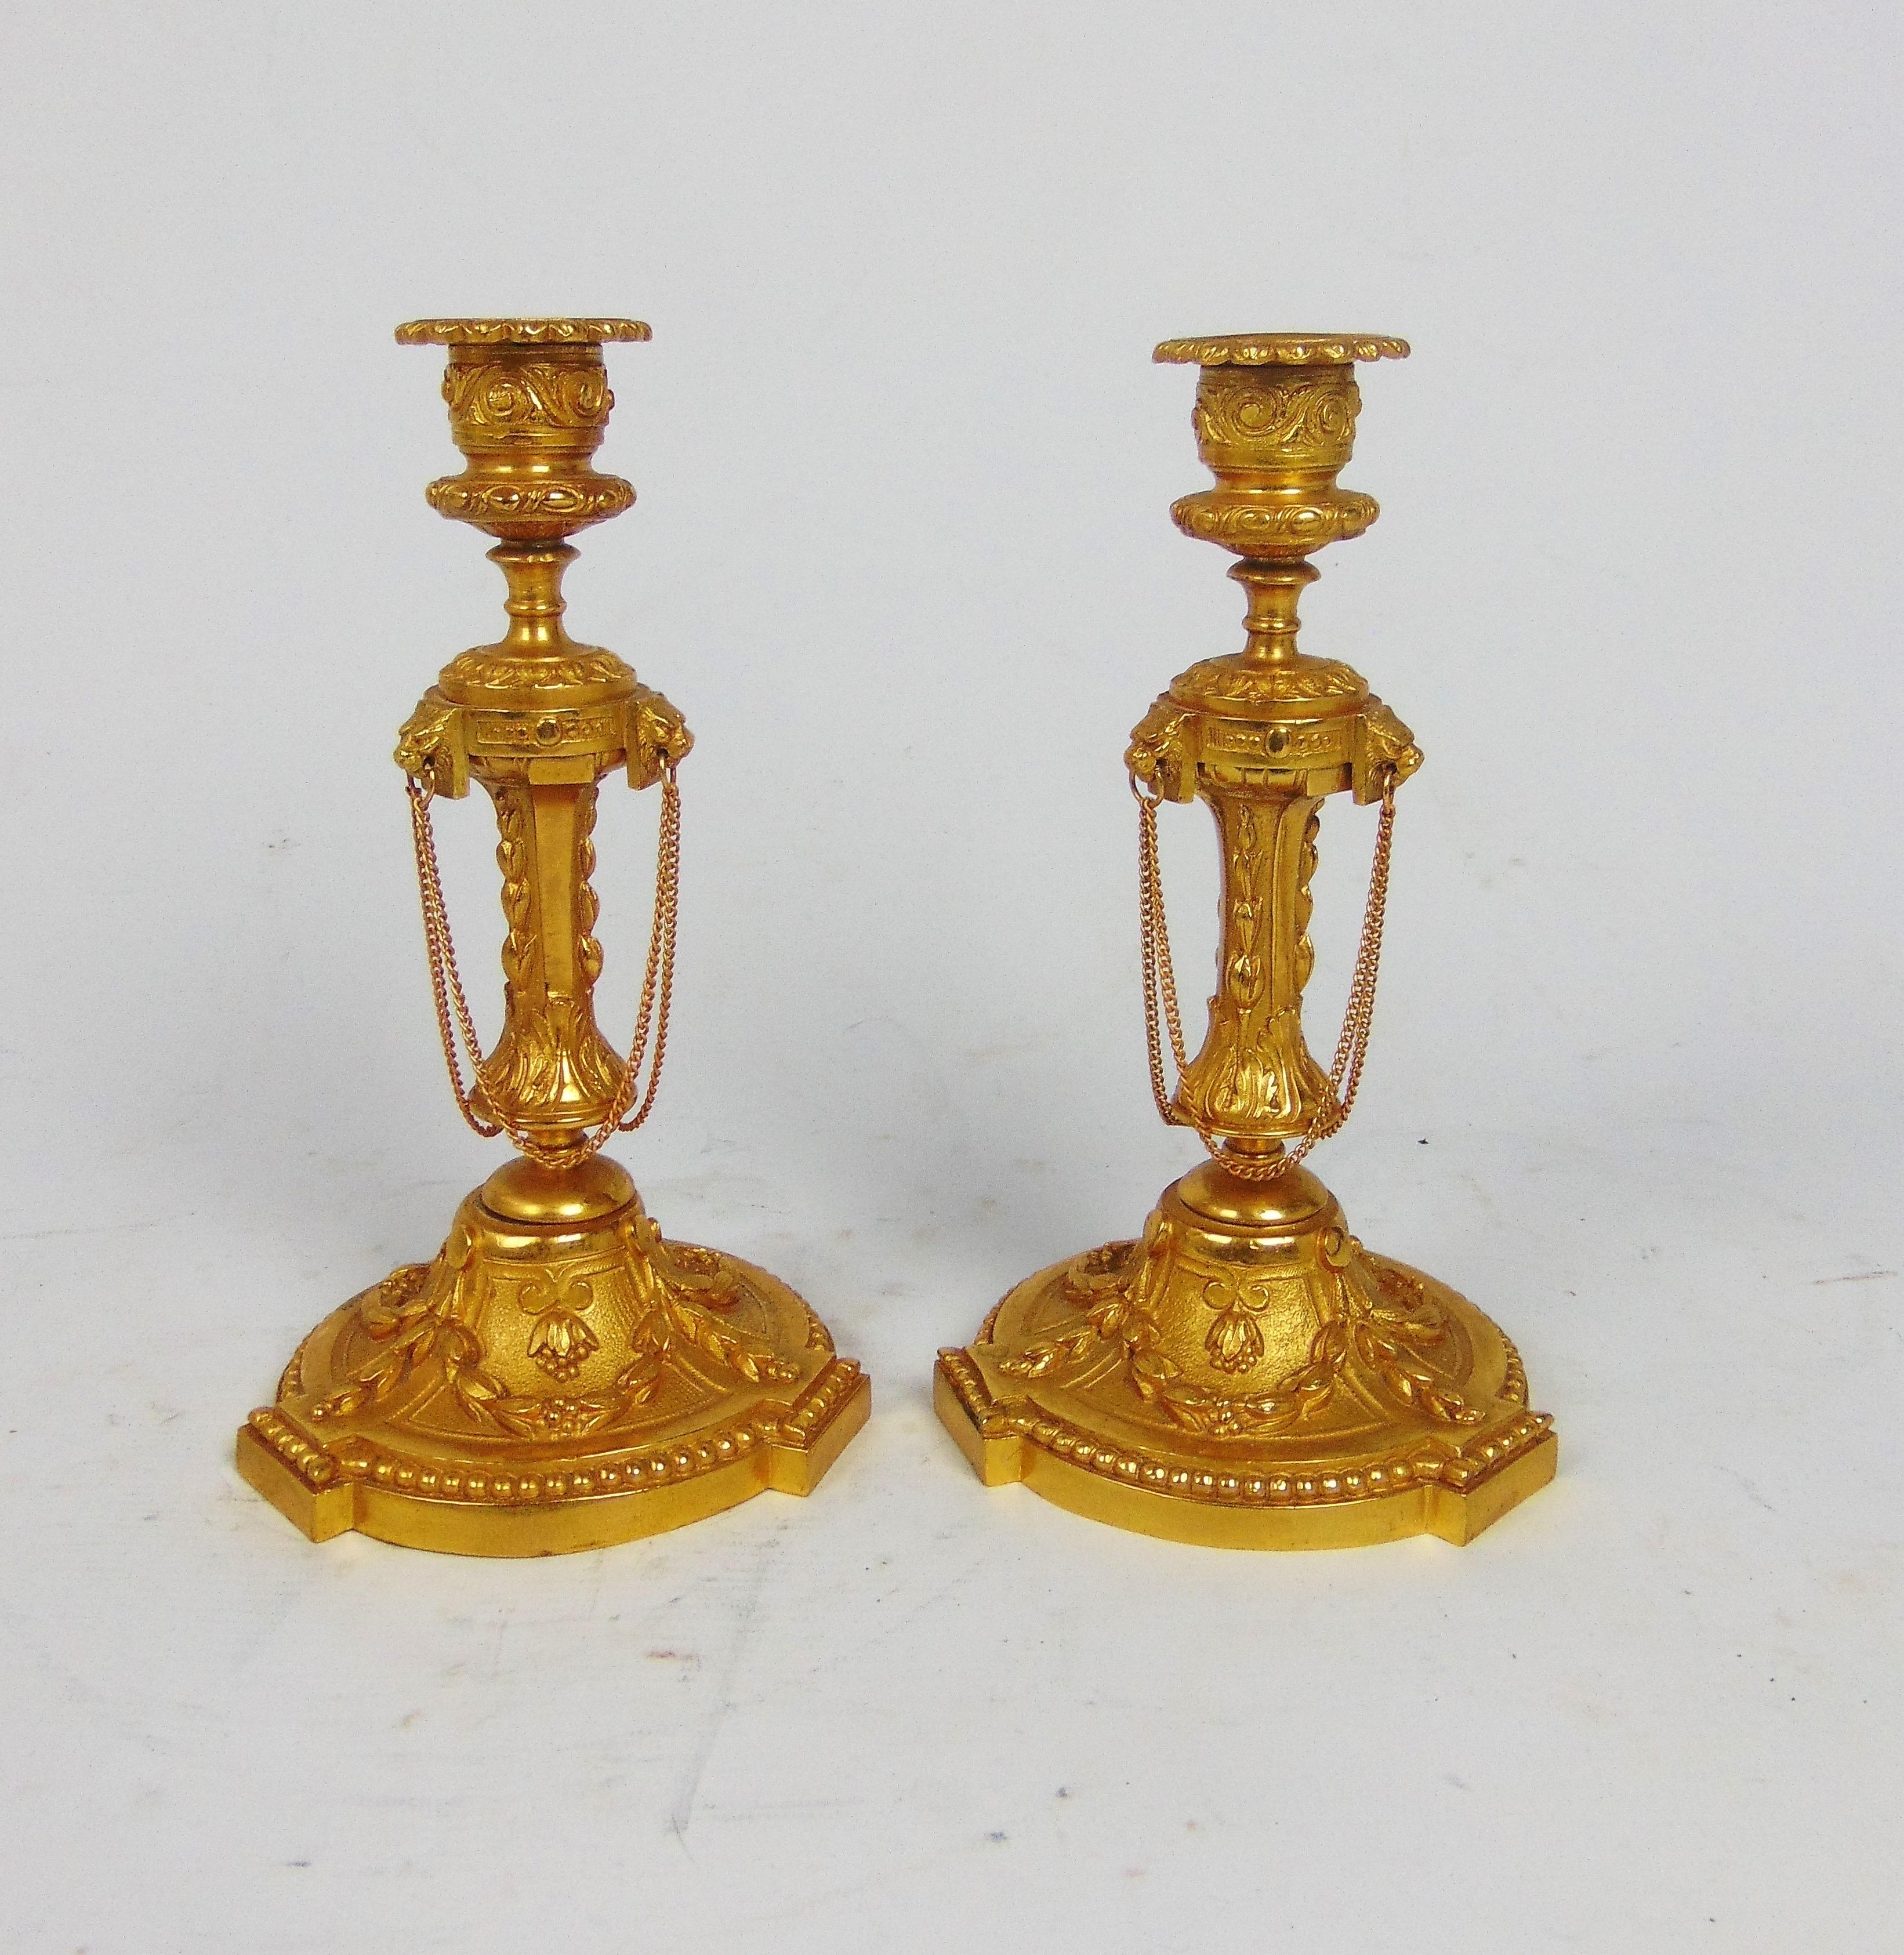 A superb quality A superb quality pair of 19th century Gilt Bronze candlesticks with lions heads over floral and swag decorated bases .
Circa 1860
23.5cm tall 
13cm wide across the base
£1180 over floral and swag decorated bases .
Circa